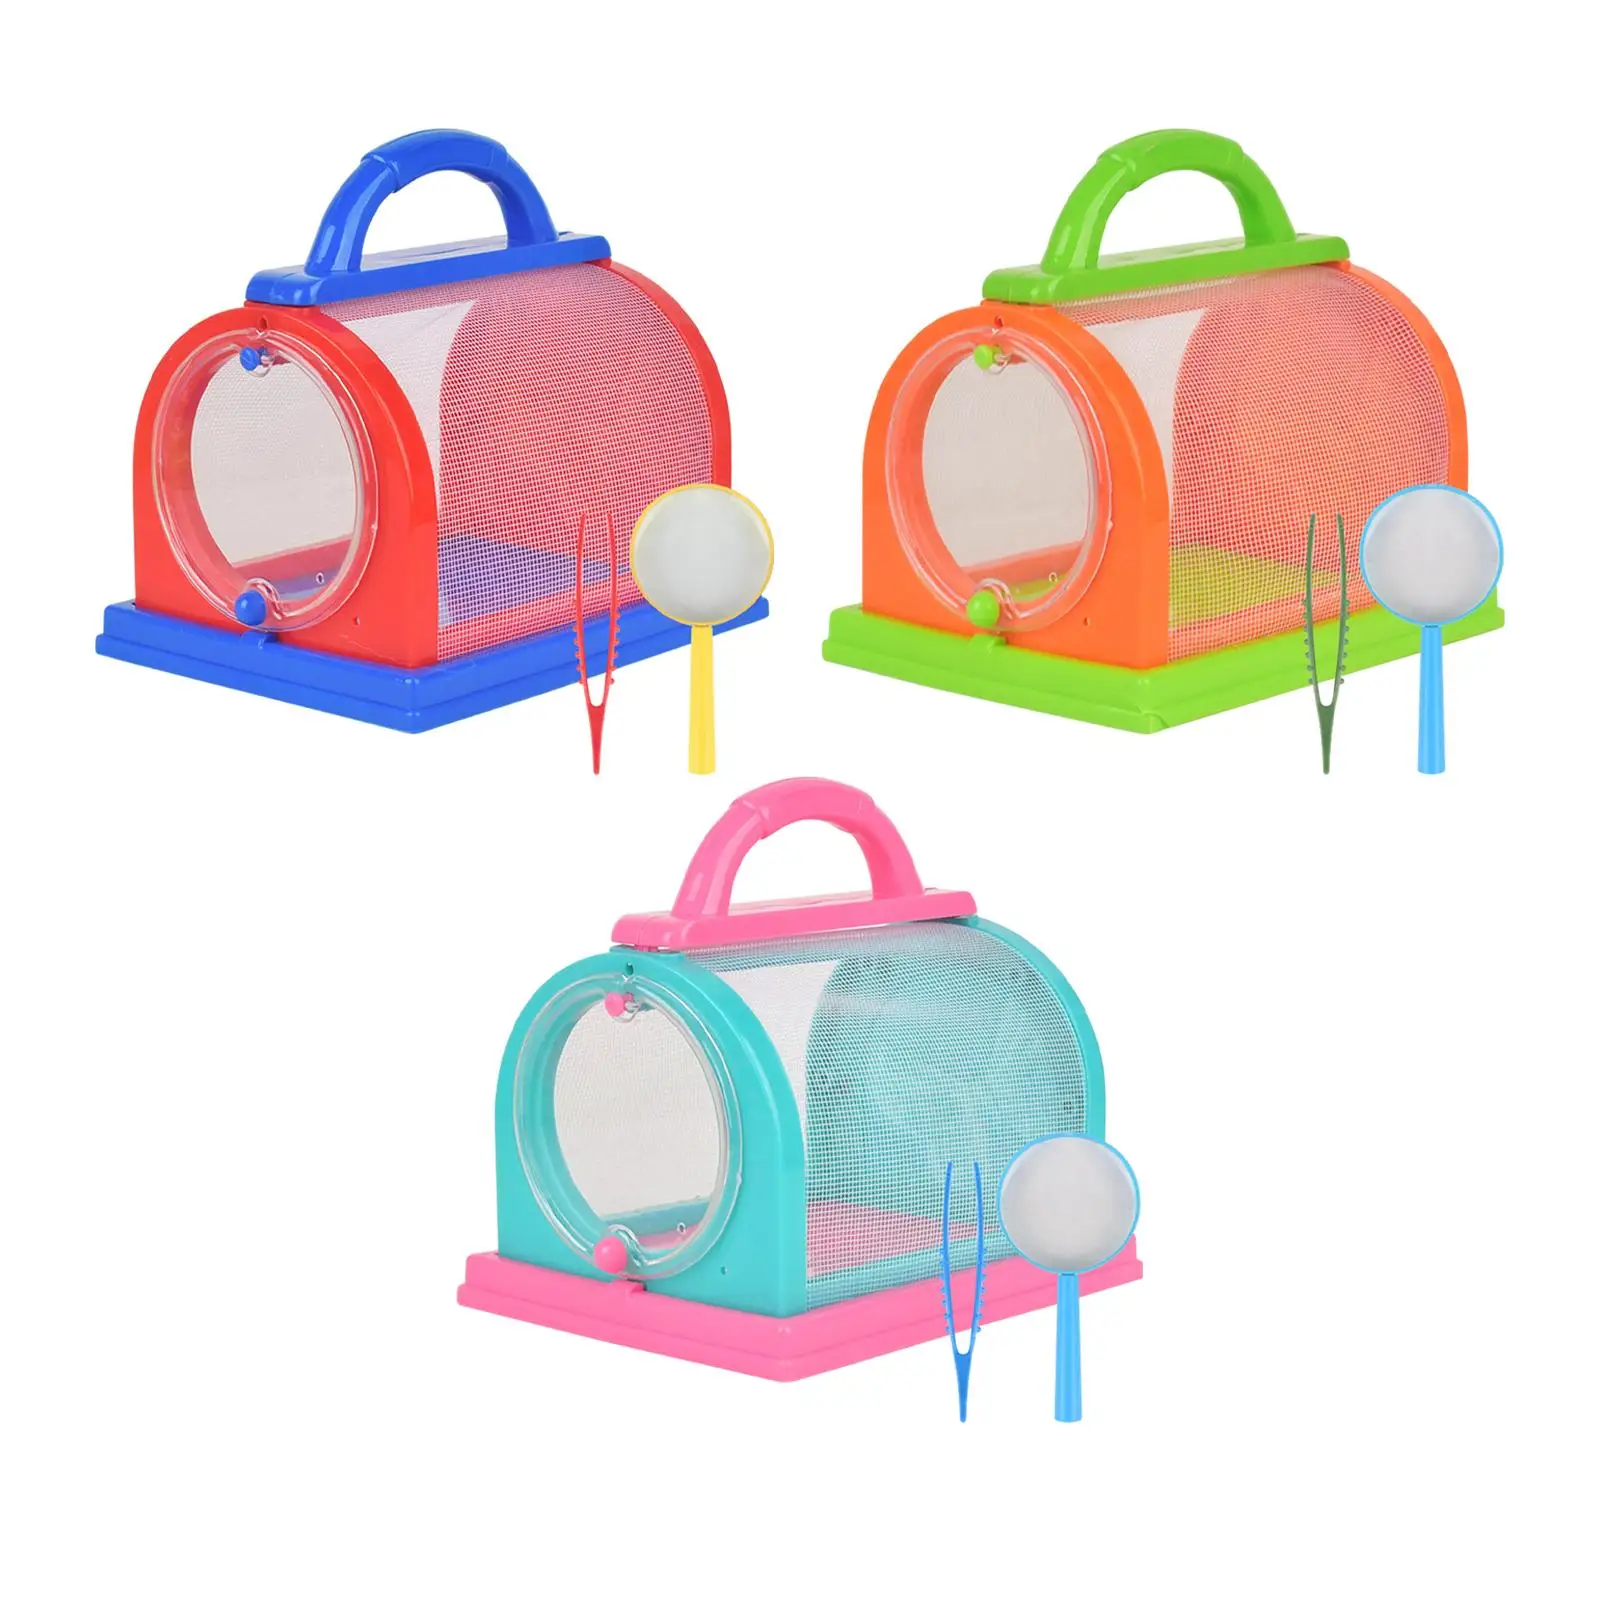 Butterfly Observation Box with Magnifying Glass Cage Observe Viewer Container for Outdoor Activities Backyard Camping Childs Toy